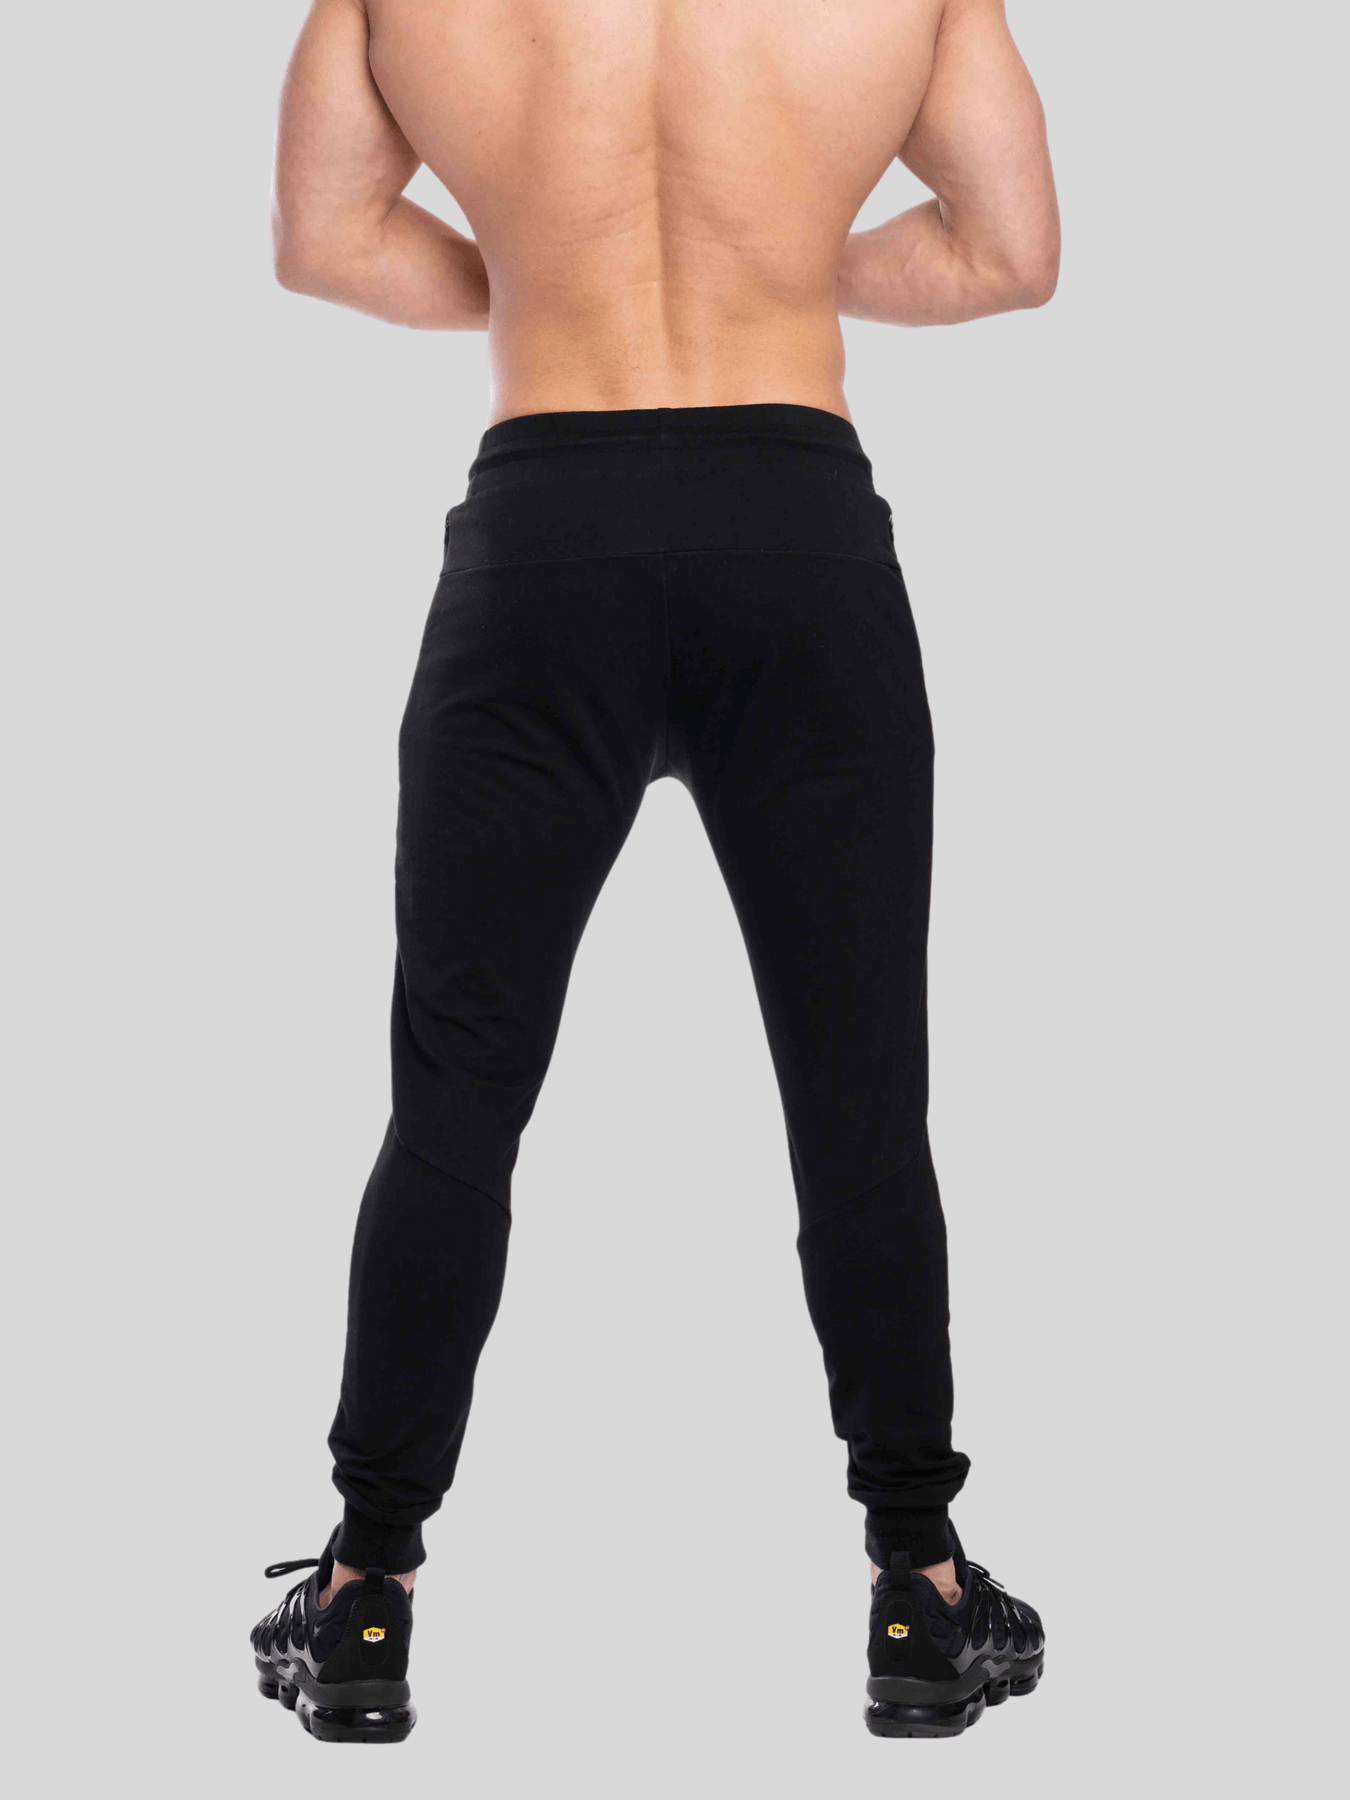 Buy NU Essential Pants - Gym and Track Pants for Men